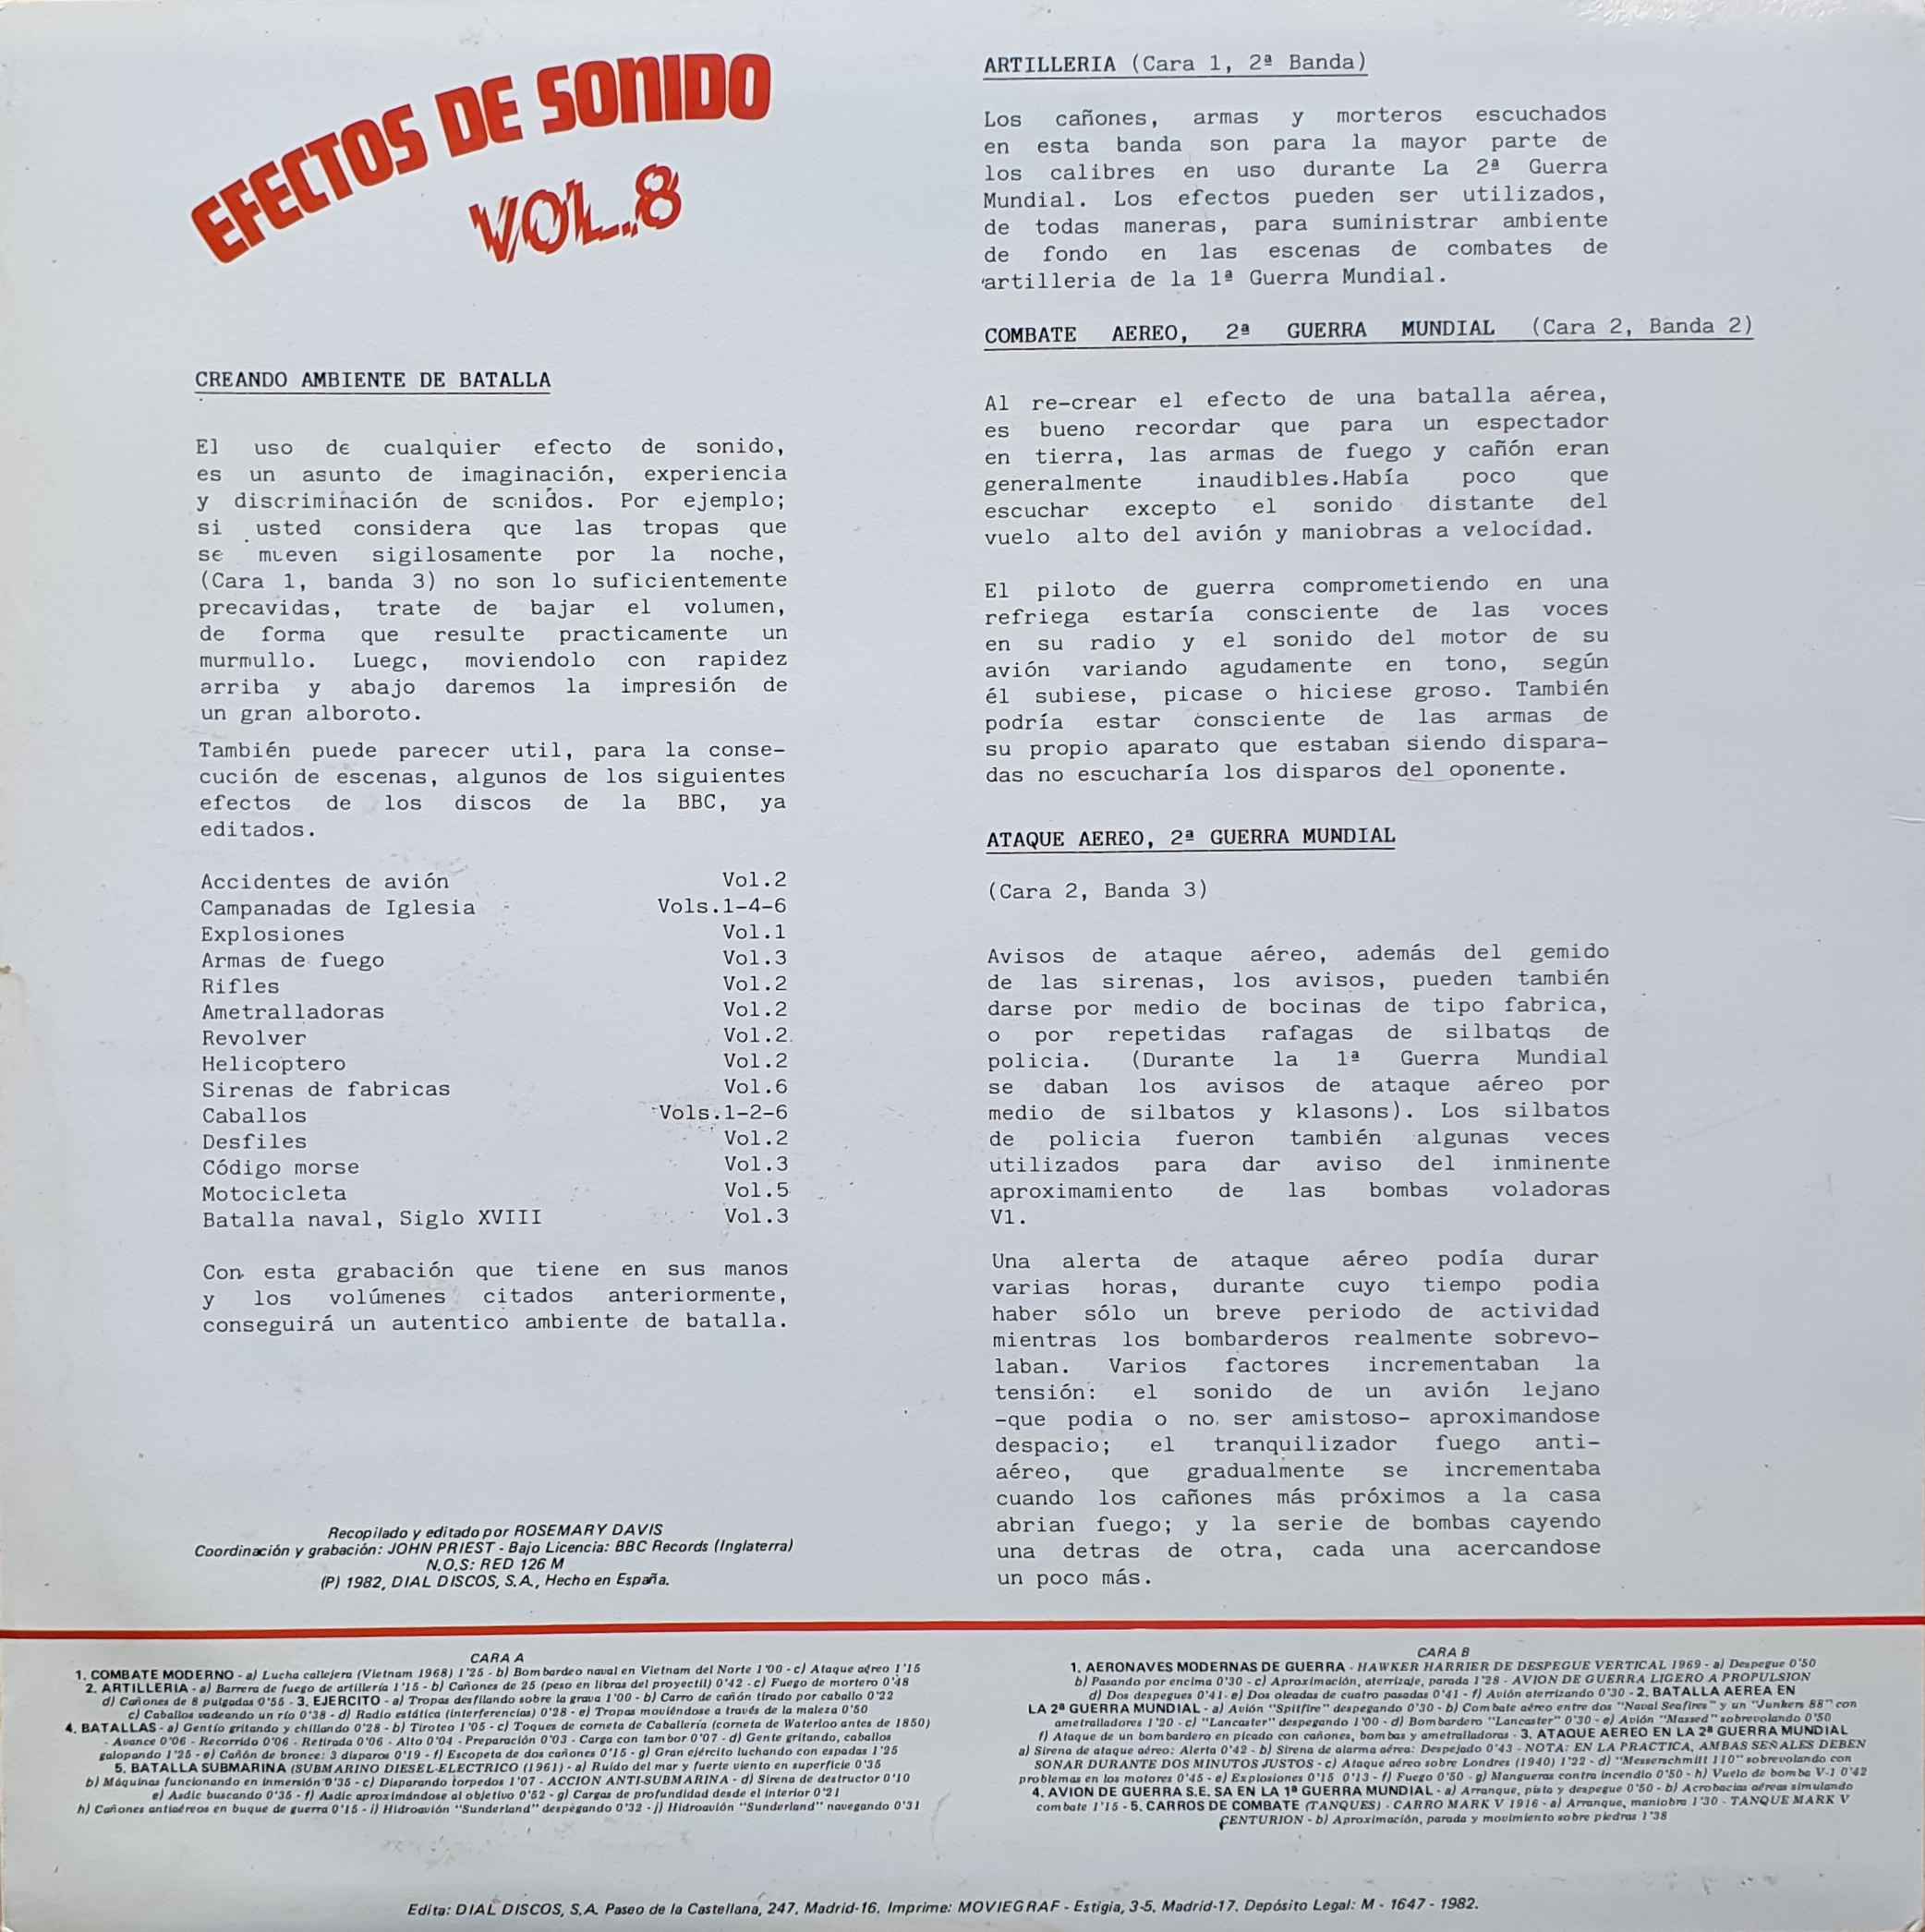 Picture of 51.0112 Efectos de sonido No 8 by artist Various from the BBC records and Tapes library